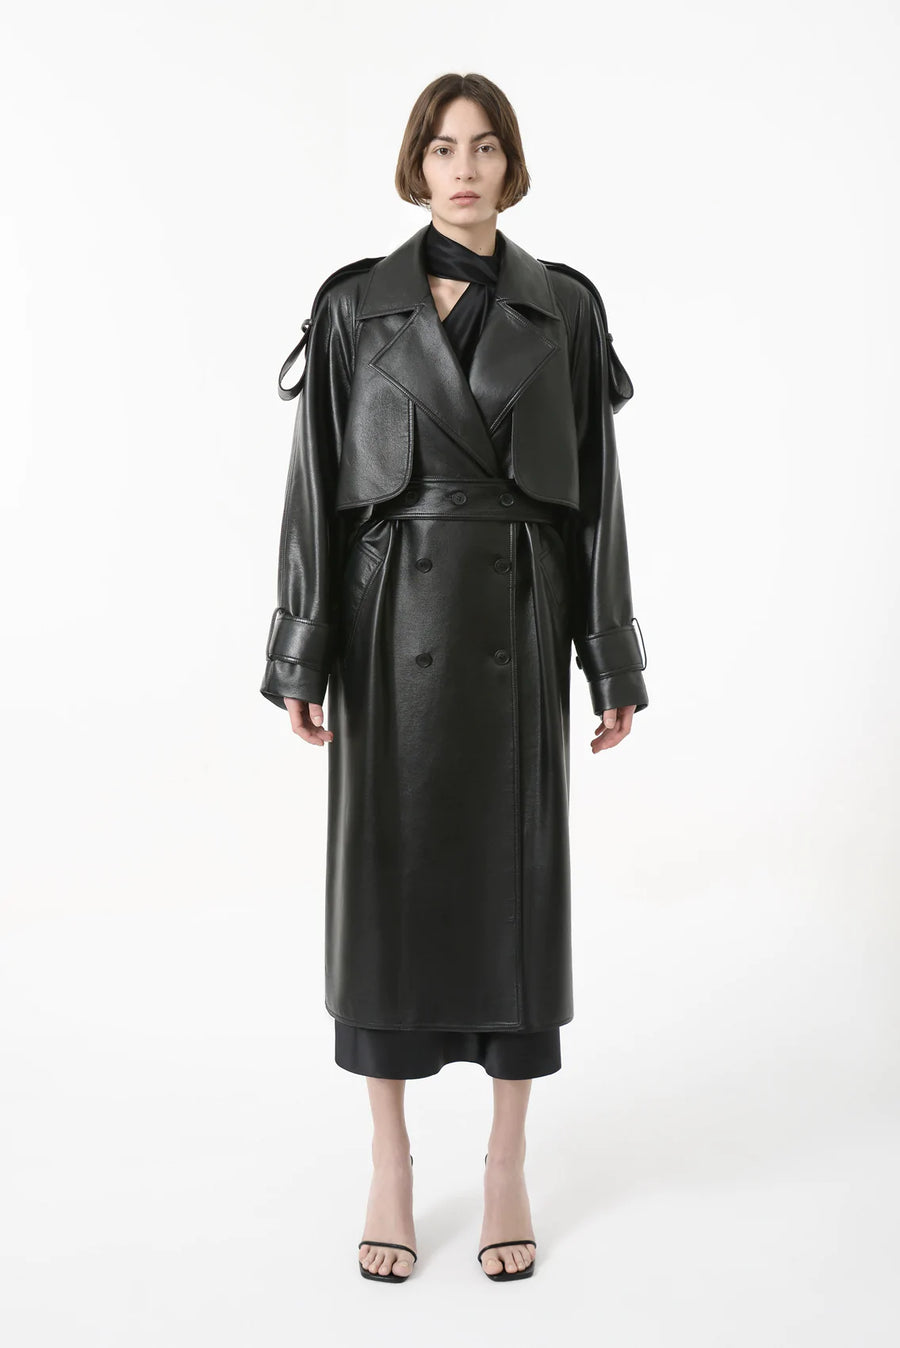 Eco Leather Utilitarian Belted Trench Coat